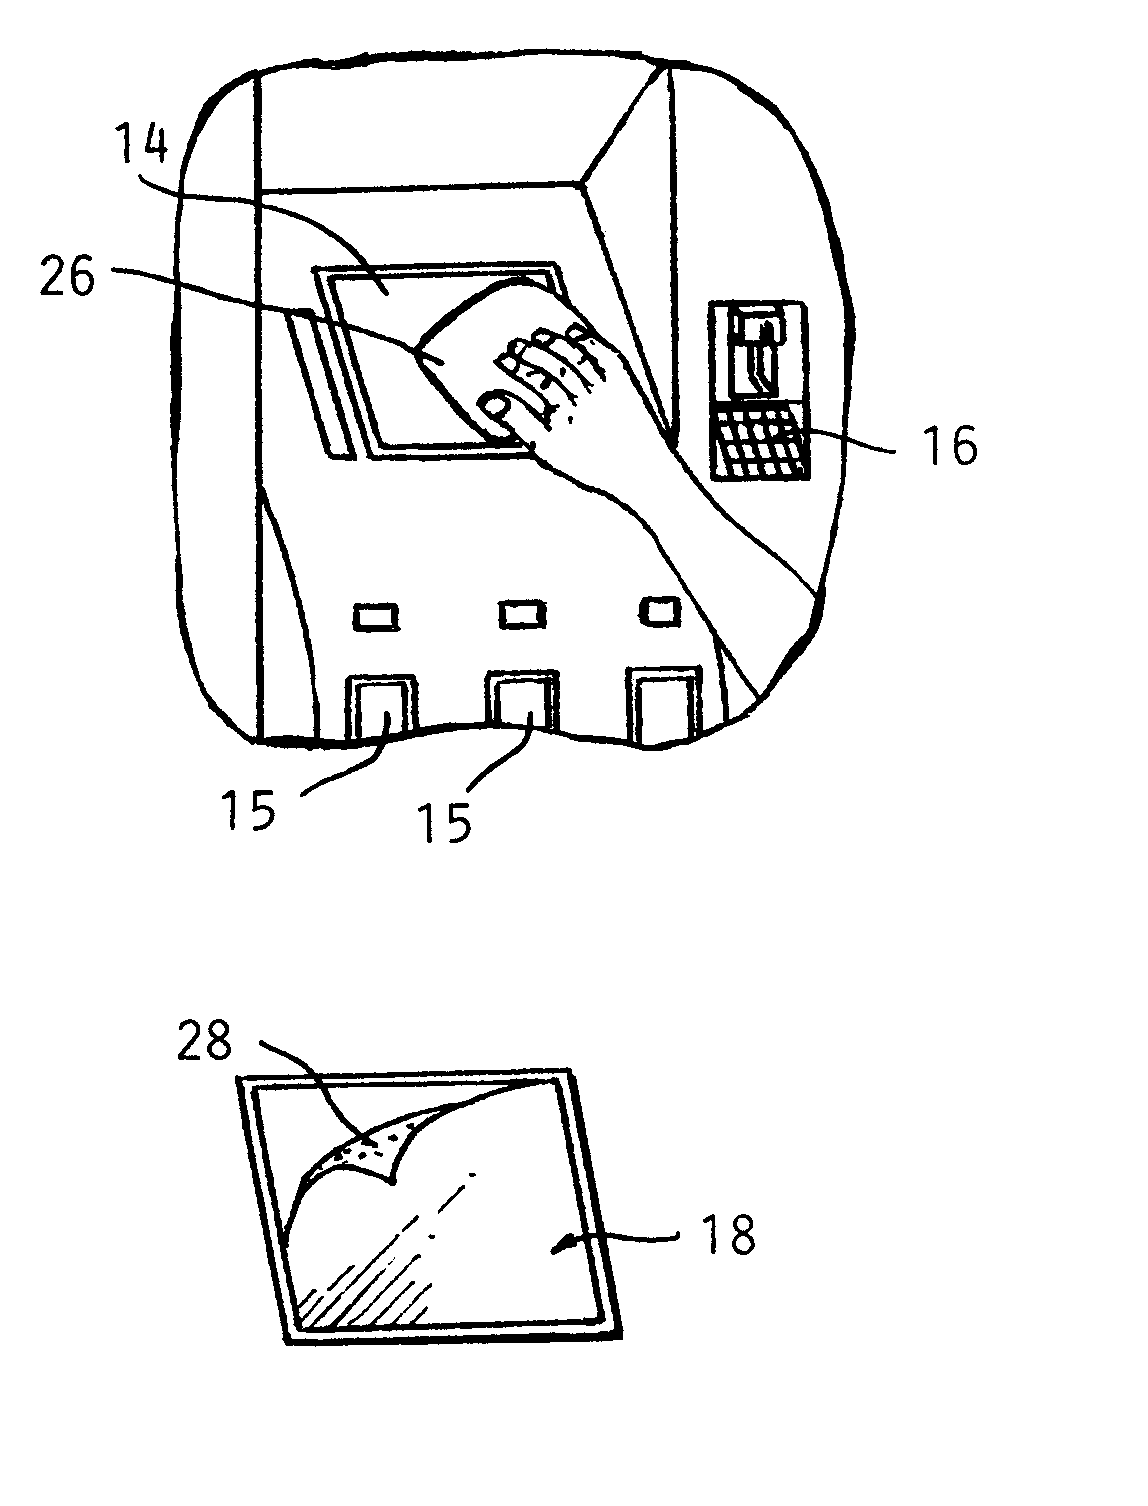 Method for protecting outdoor environment display screens and membrane keypads